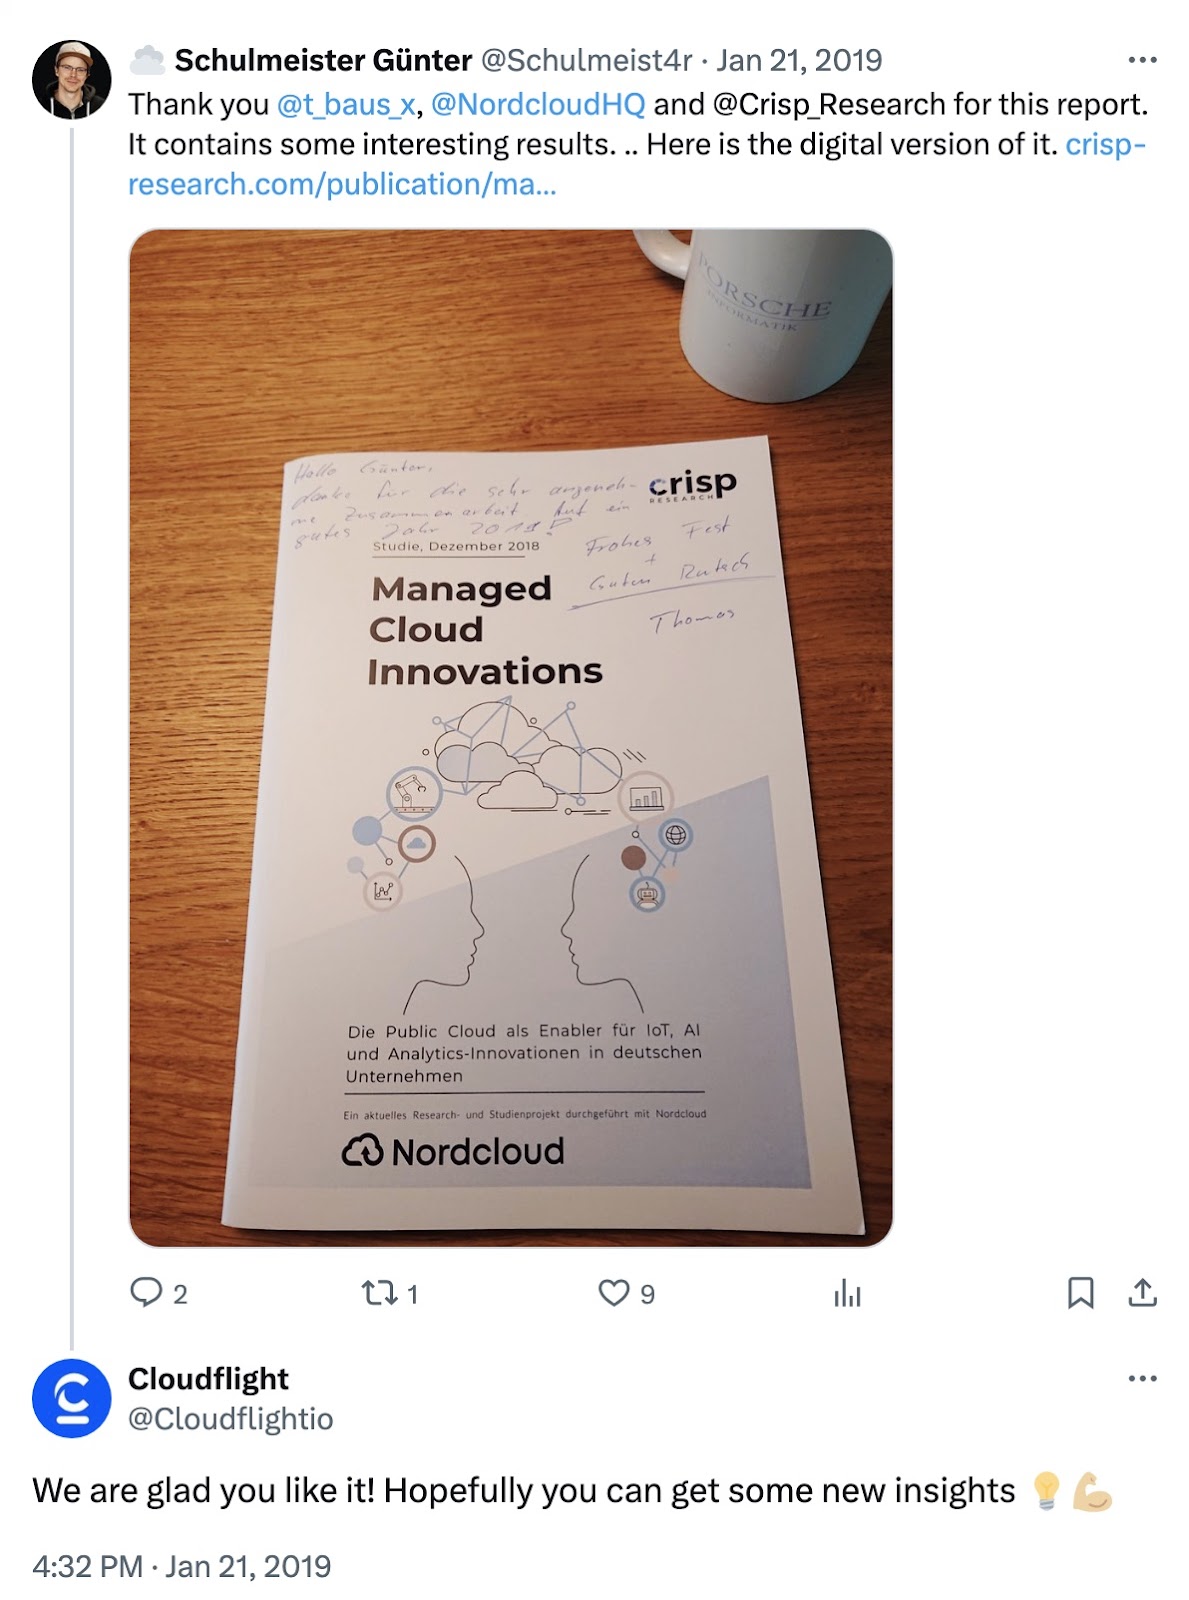 Divante (now Cloudflight Poland) station  connected  X sharing "Managed Cloud Innovations" report